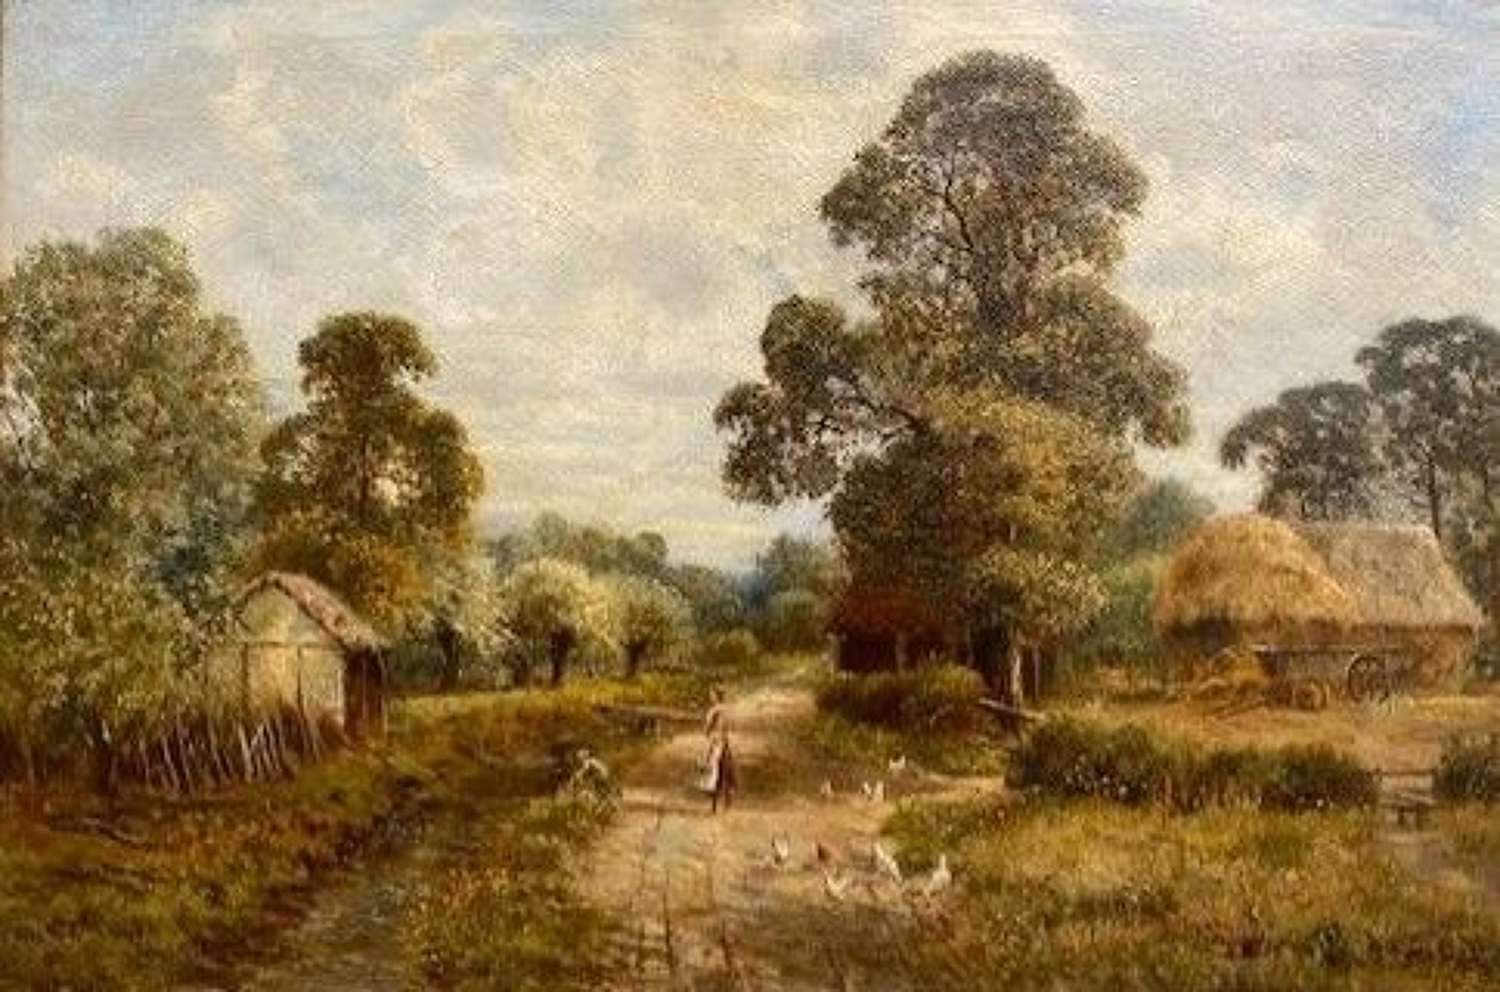 An early 20th century oil painting on canvas.